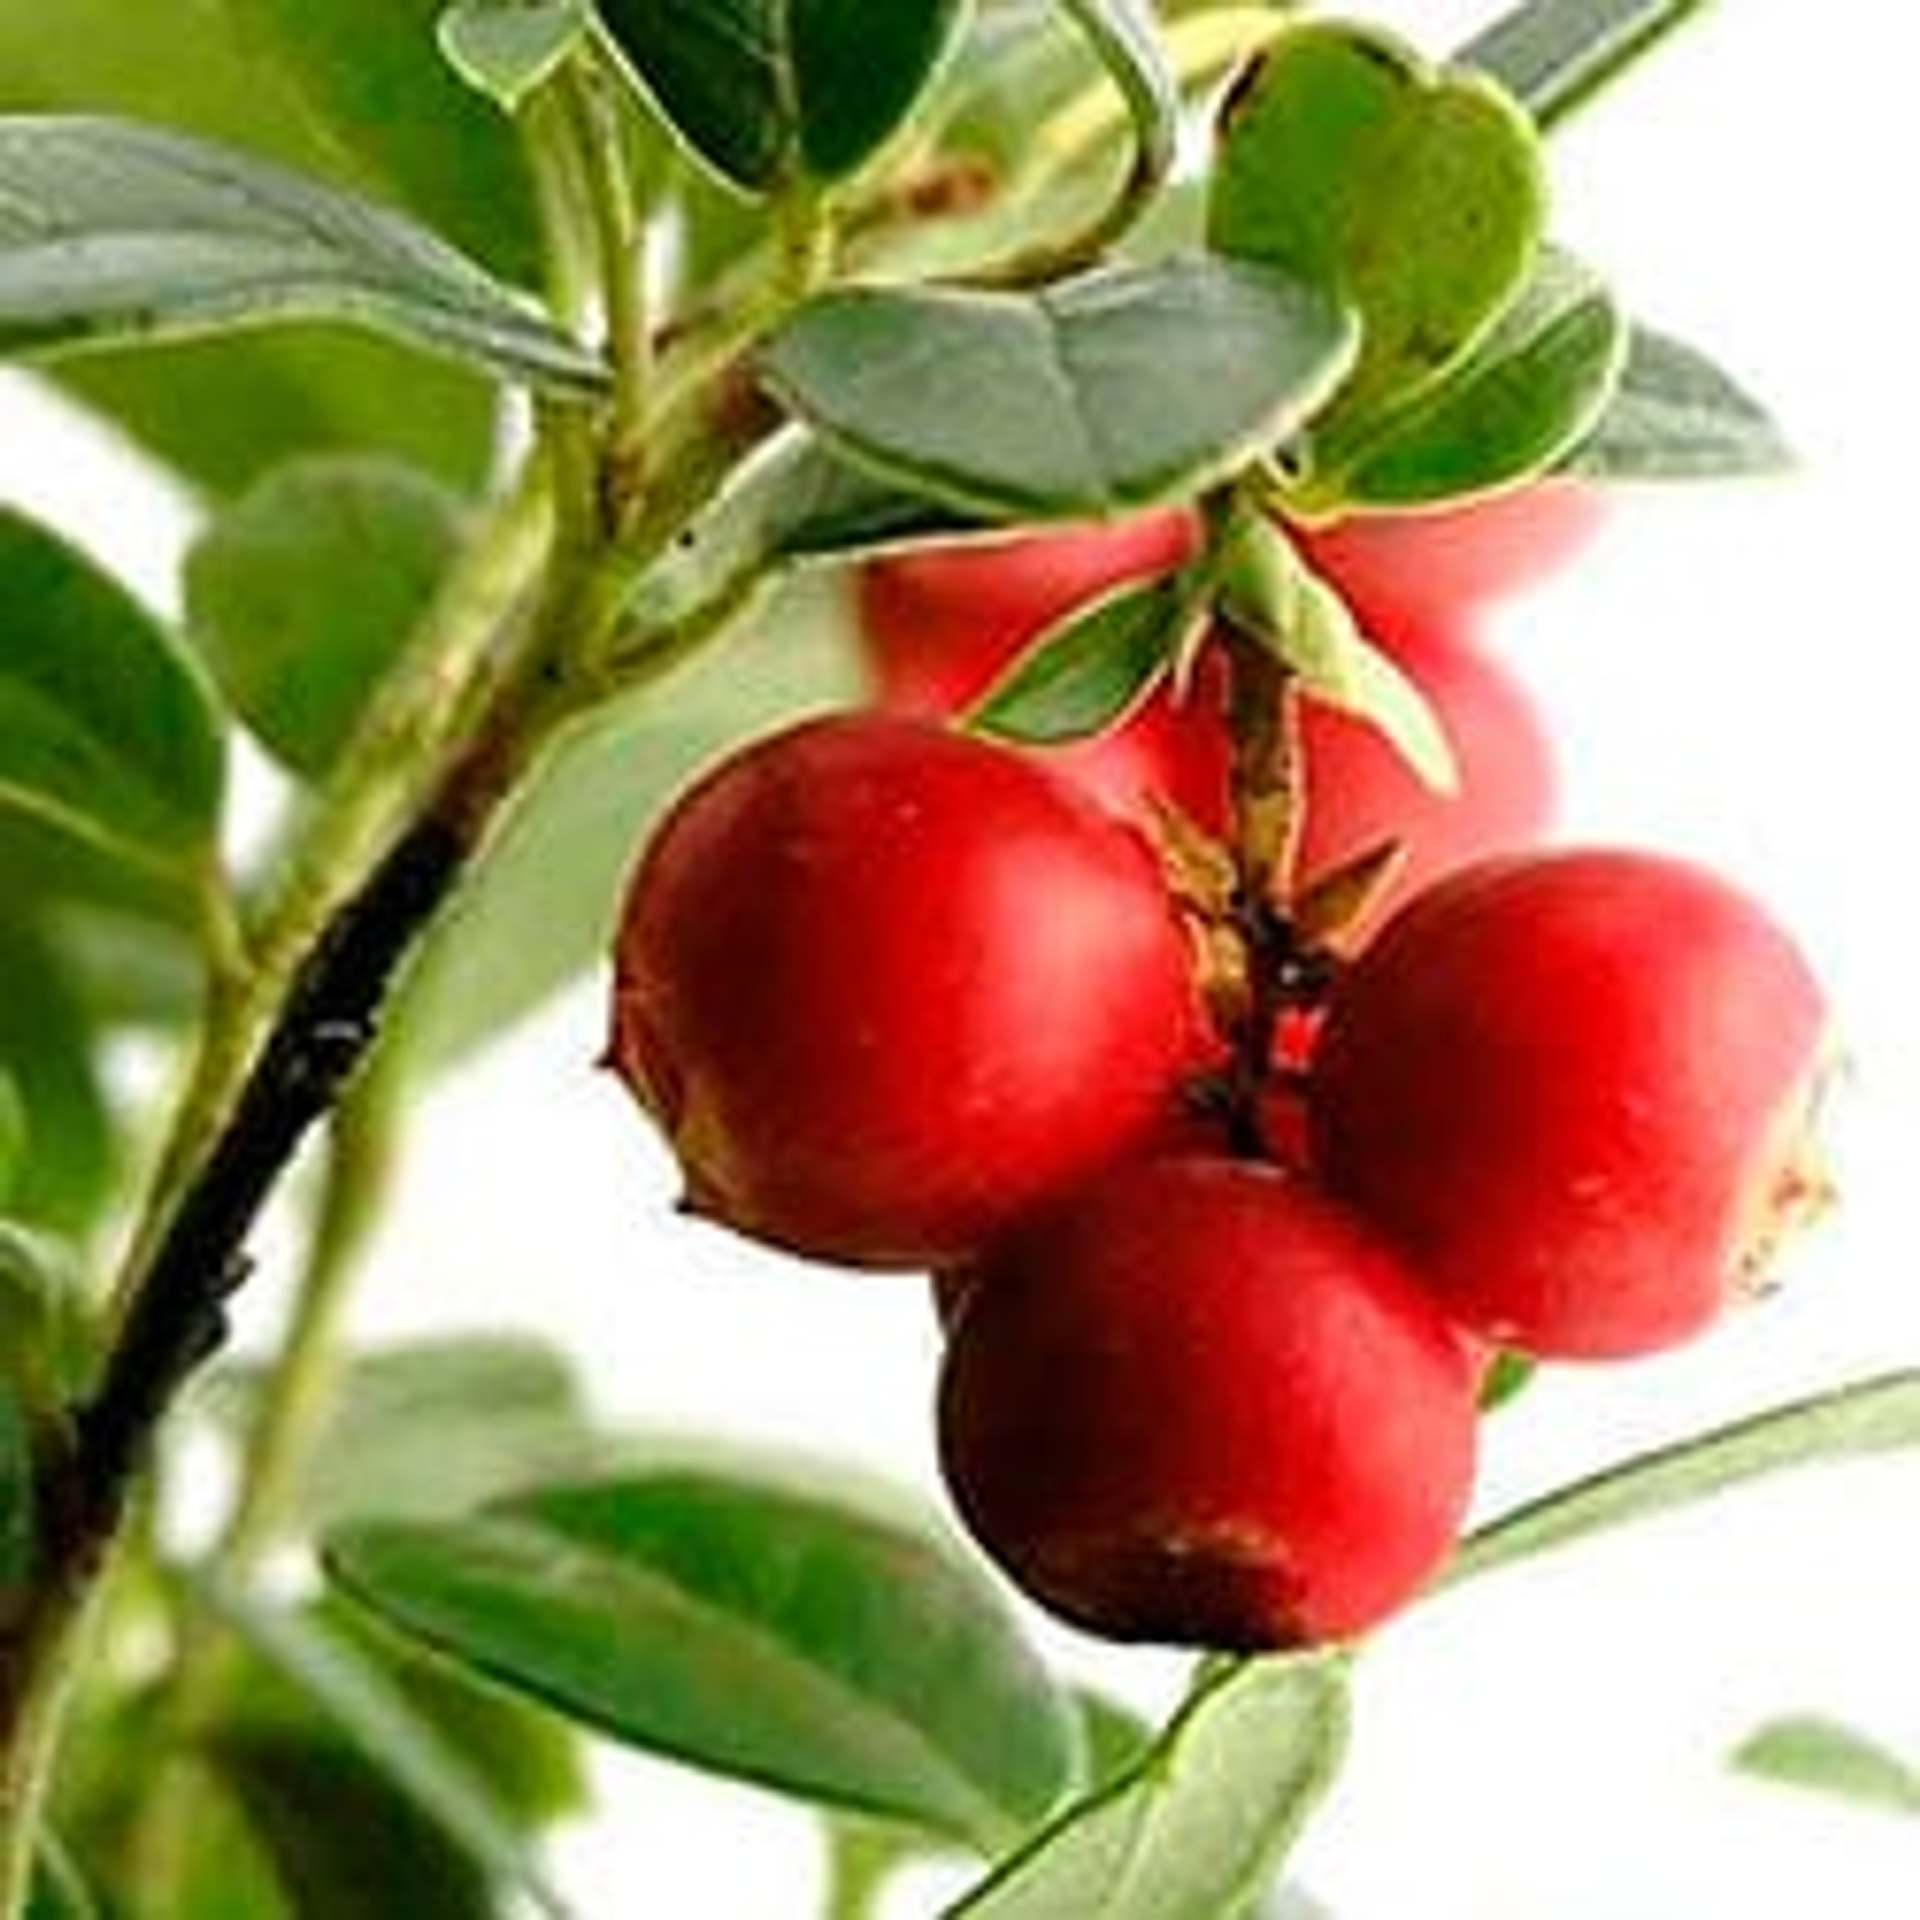 Camu Camu, an excellent source of natural vitamin C from Peru, has many health benefits without any side effects. Use camu camu to ward off colds and other infections.